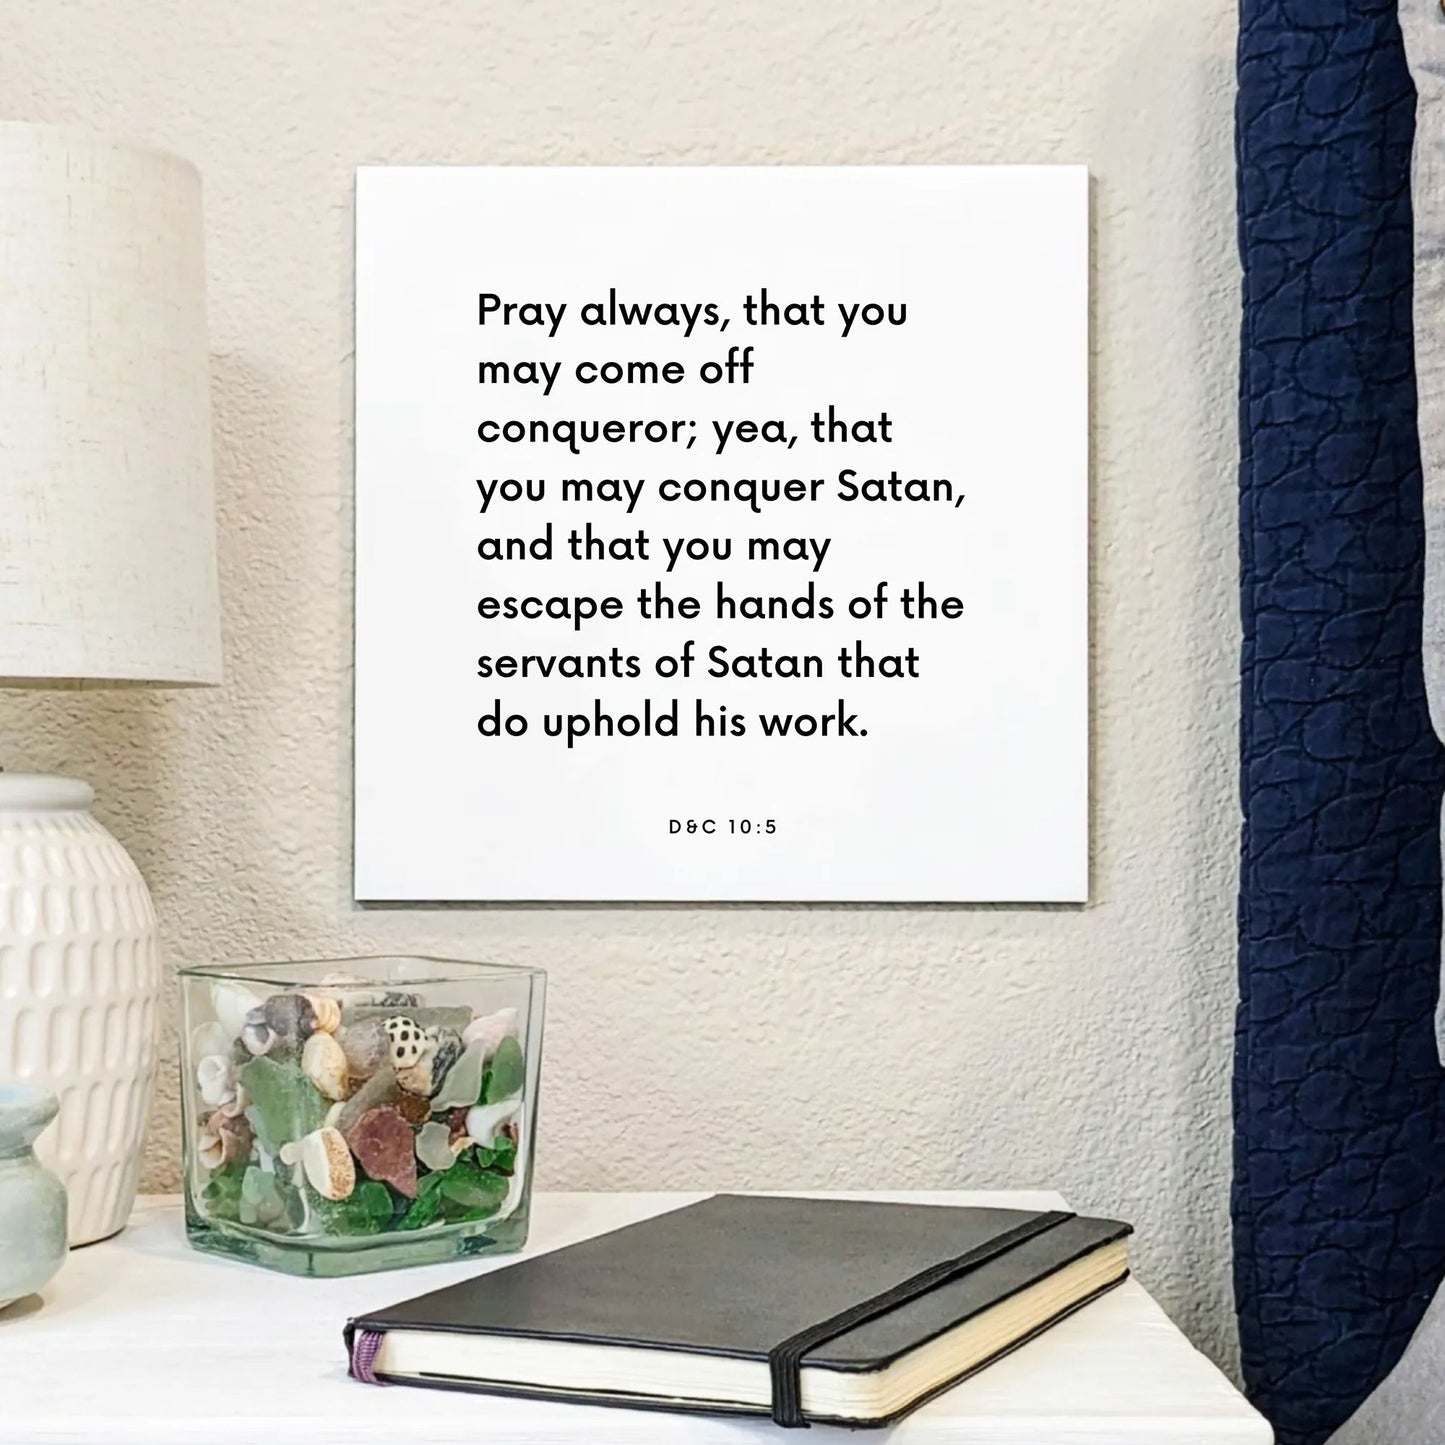 Bedside mouting of the scripture tile for D&C 10:5 - "Pray always, that you may come off conqueror"